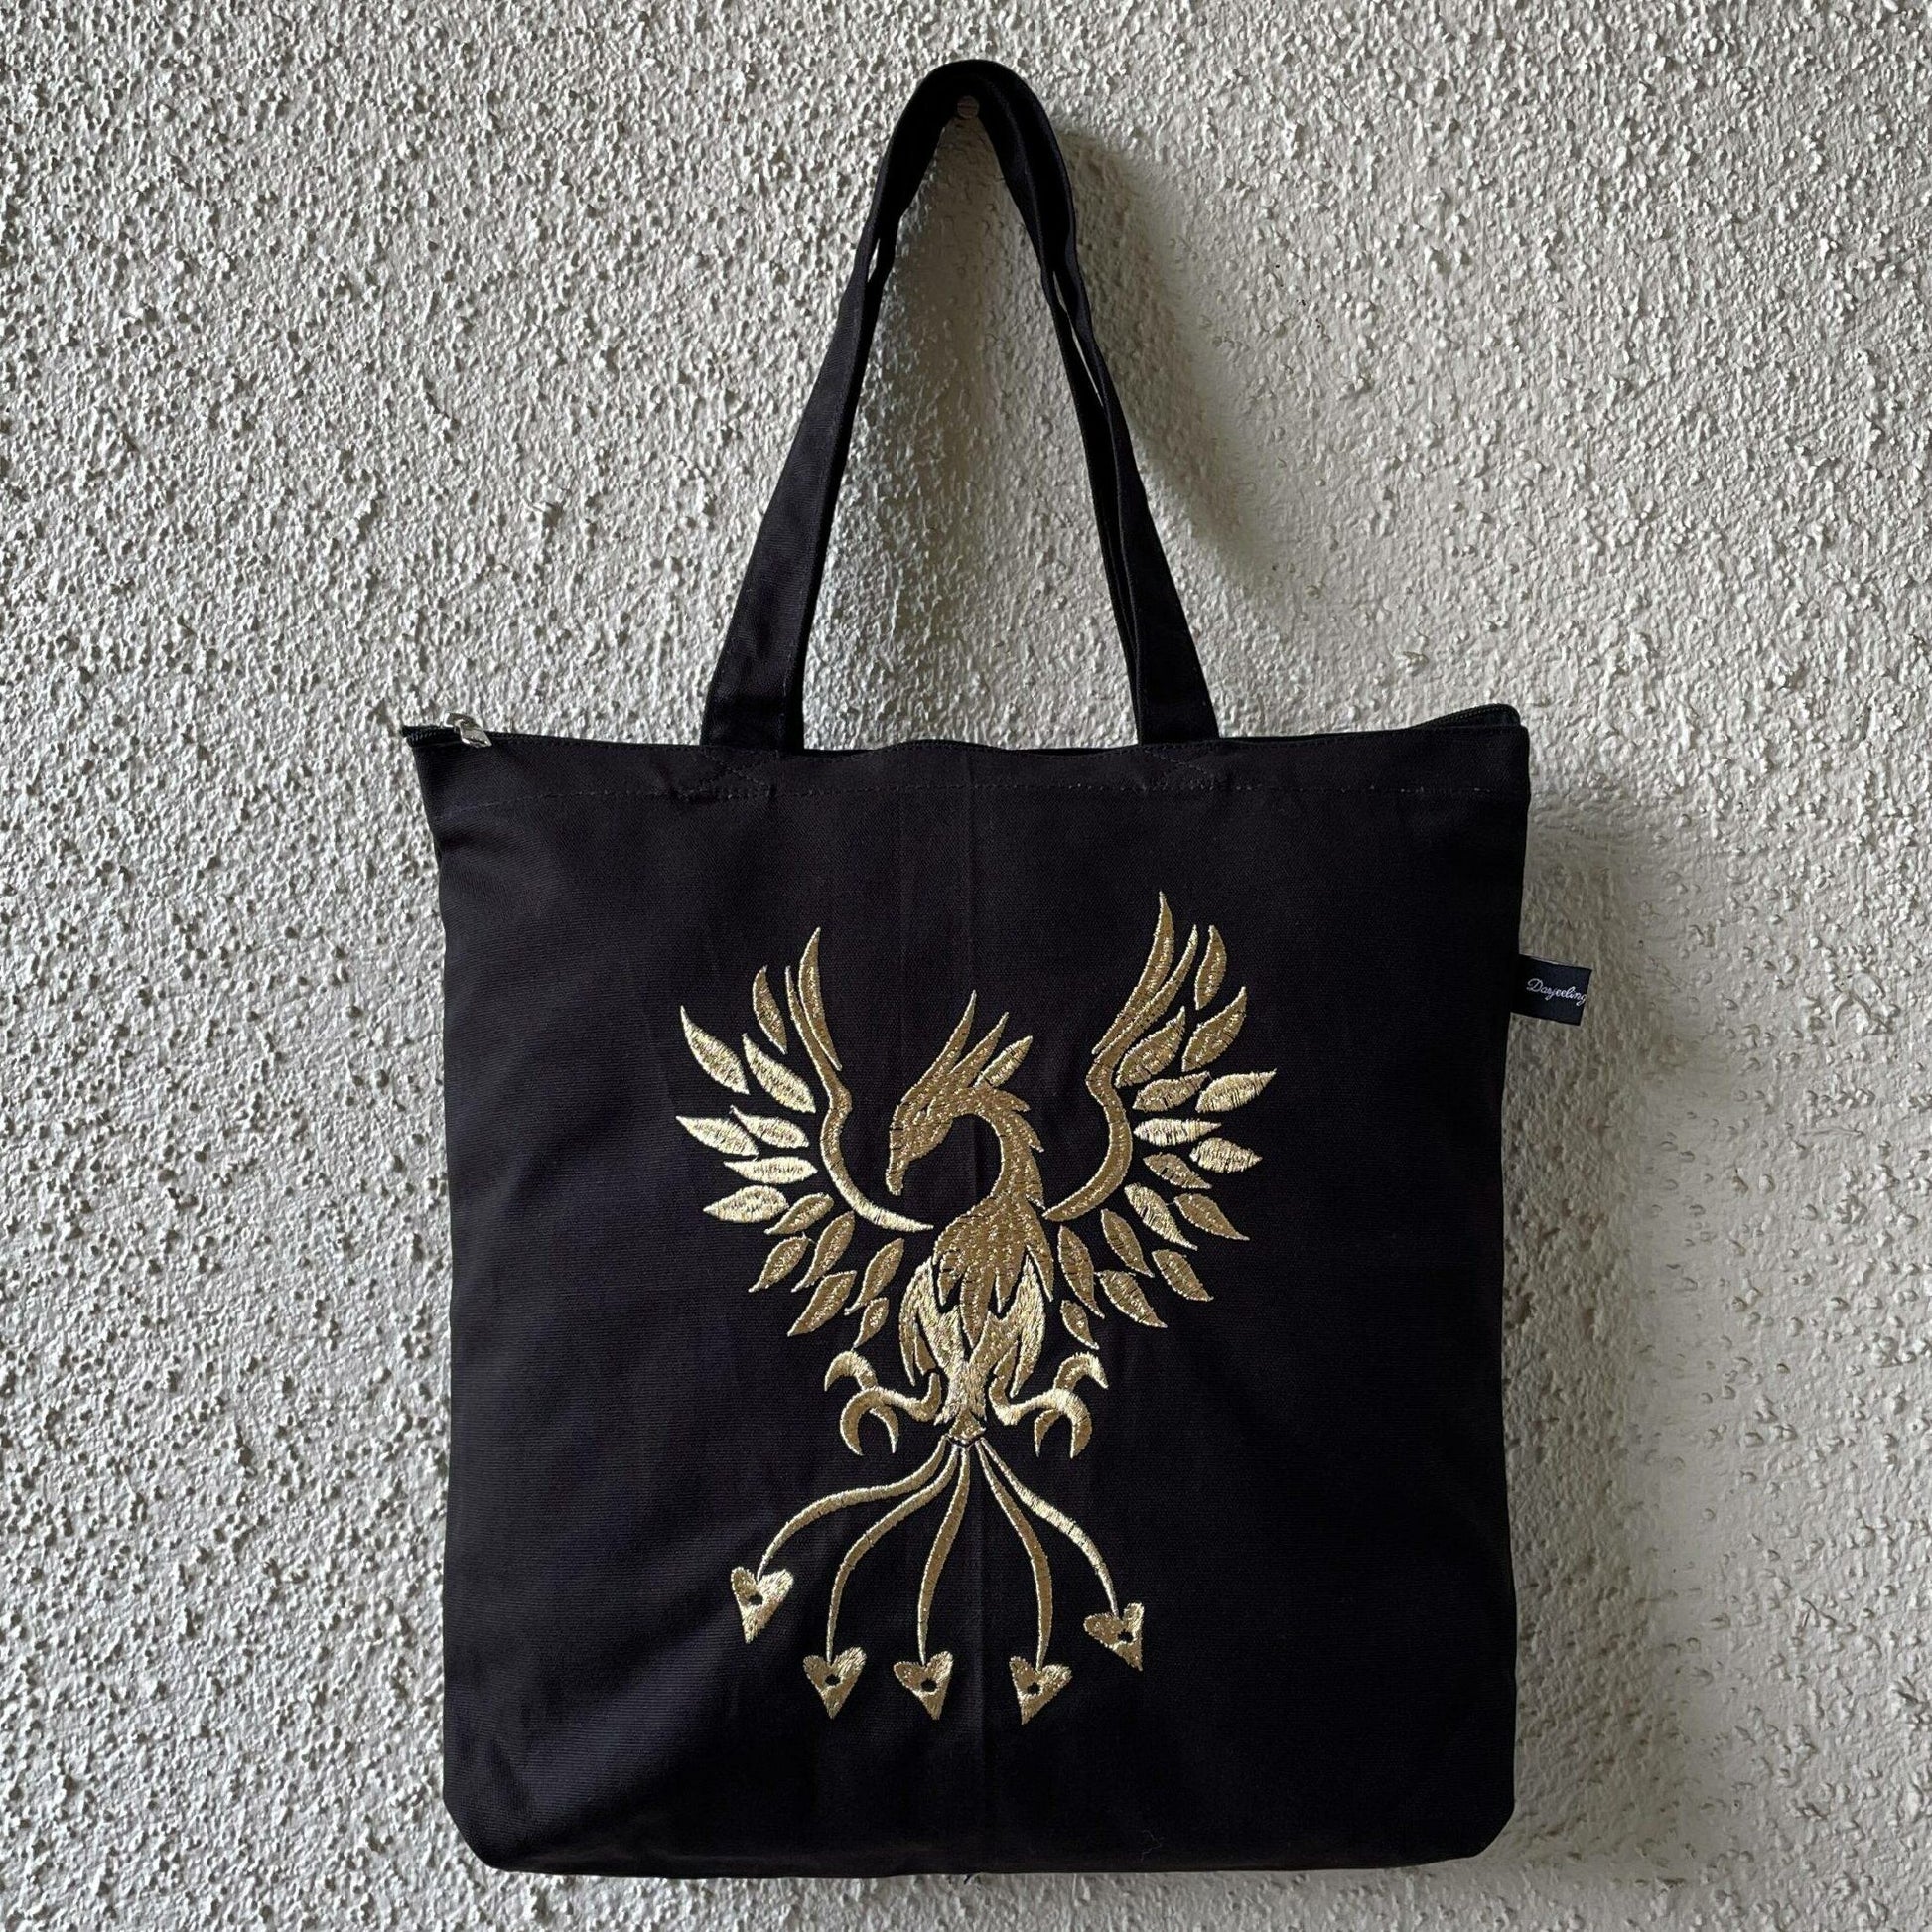 Magnificent Phoenix Embroidered Canvas Tote